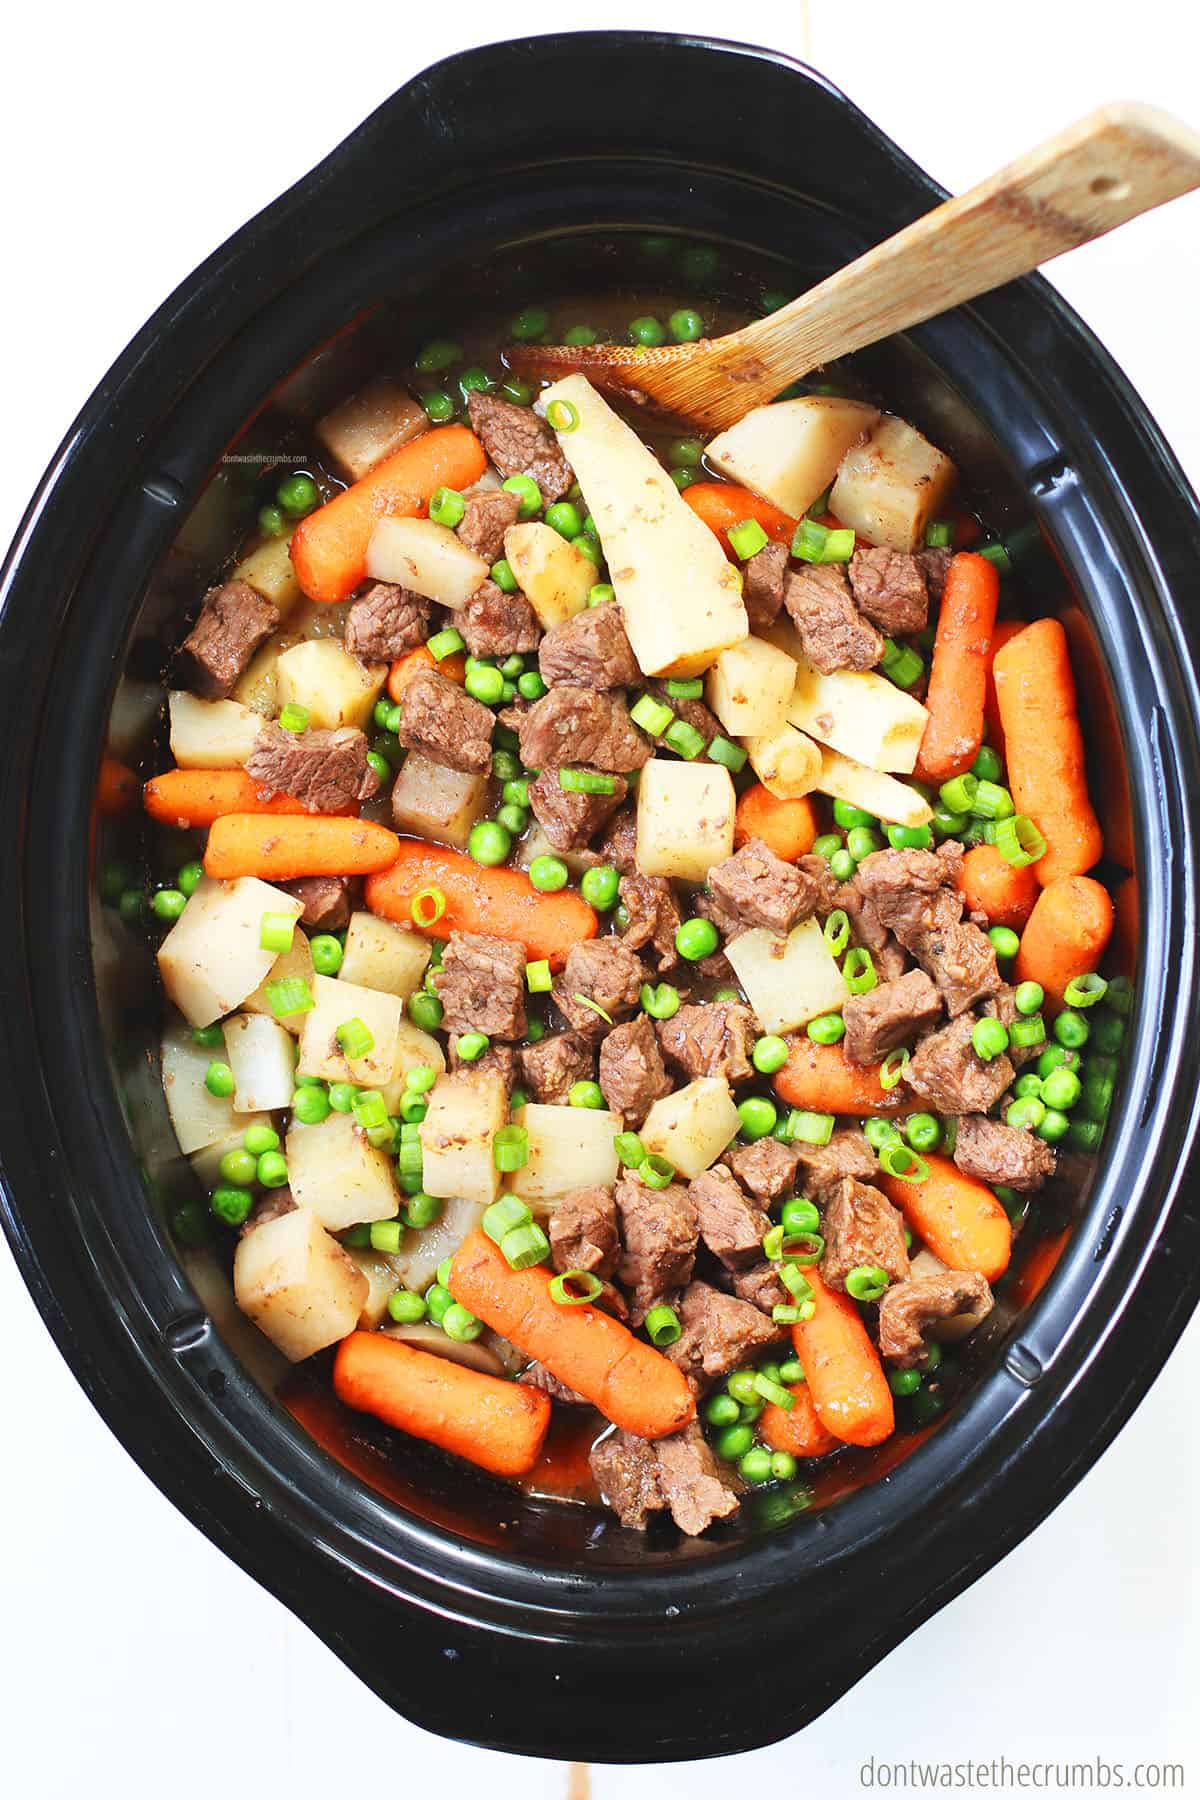 This slow cooker beef stew is ready! There is cut beef, parsnips, turnips, carrots, and peas in the crock pot.